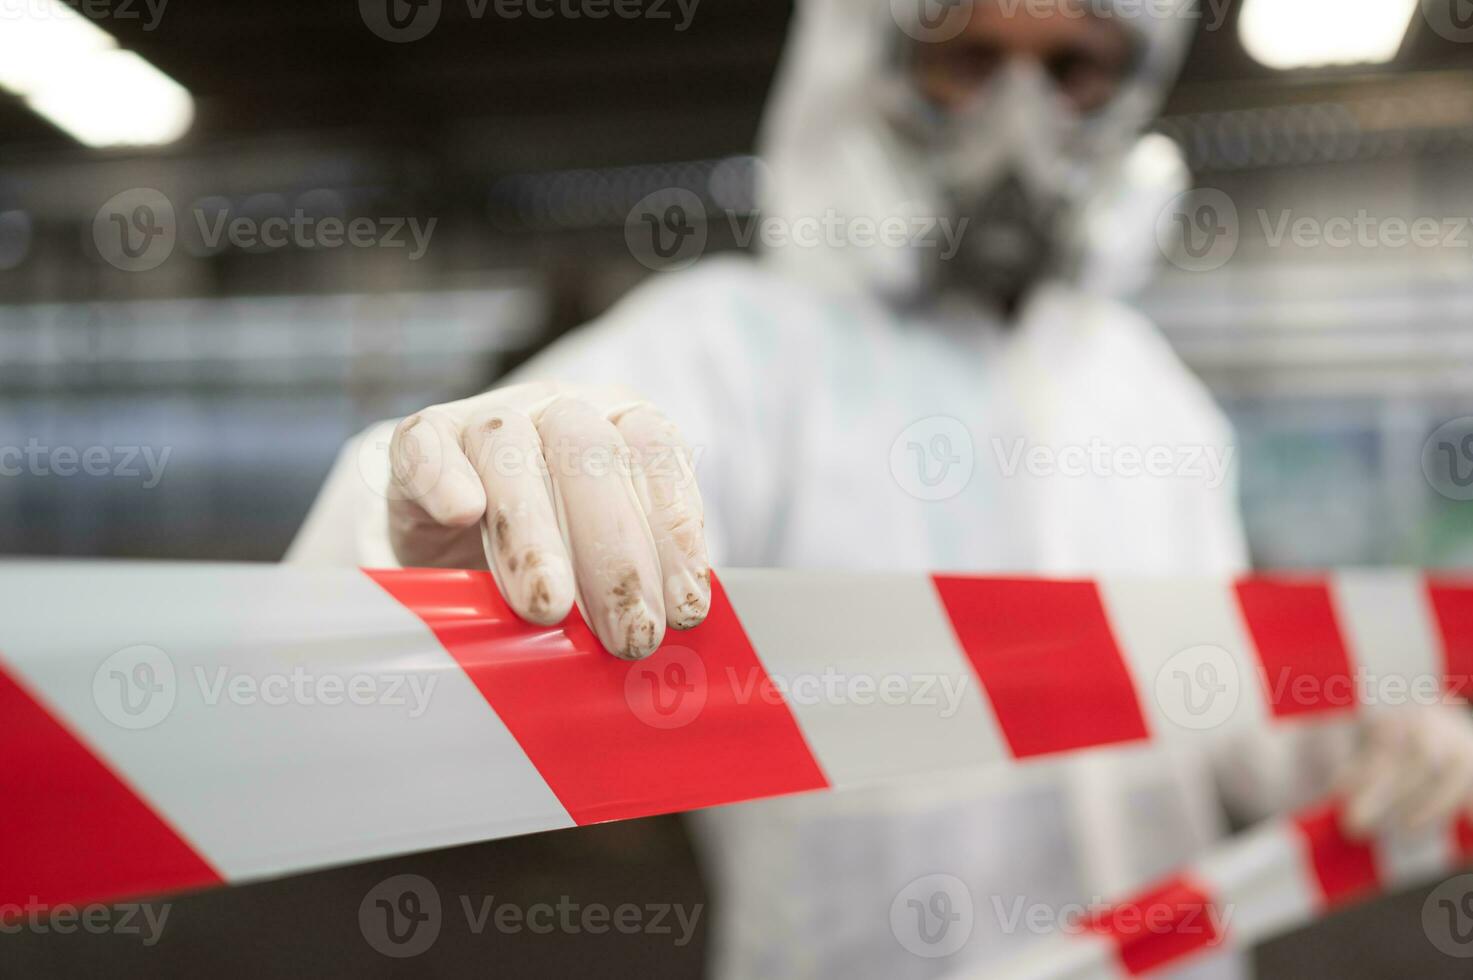 Restricted area, officials employ white and red stripes to block the area where a chemical leak is occurring. To prevent individuals from coming into contact with potentially dangerous chemicals, photo